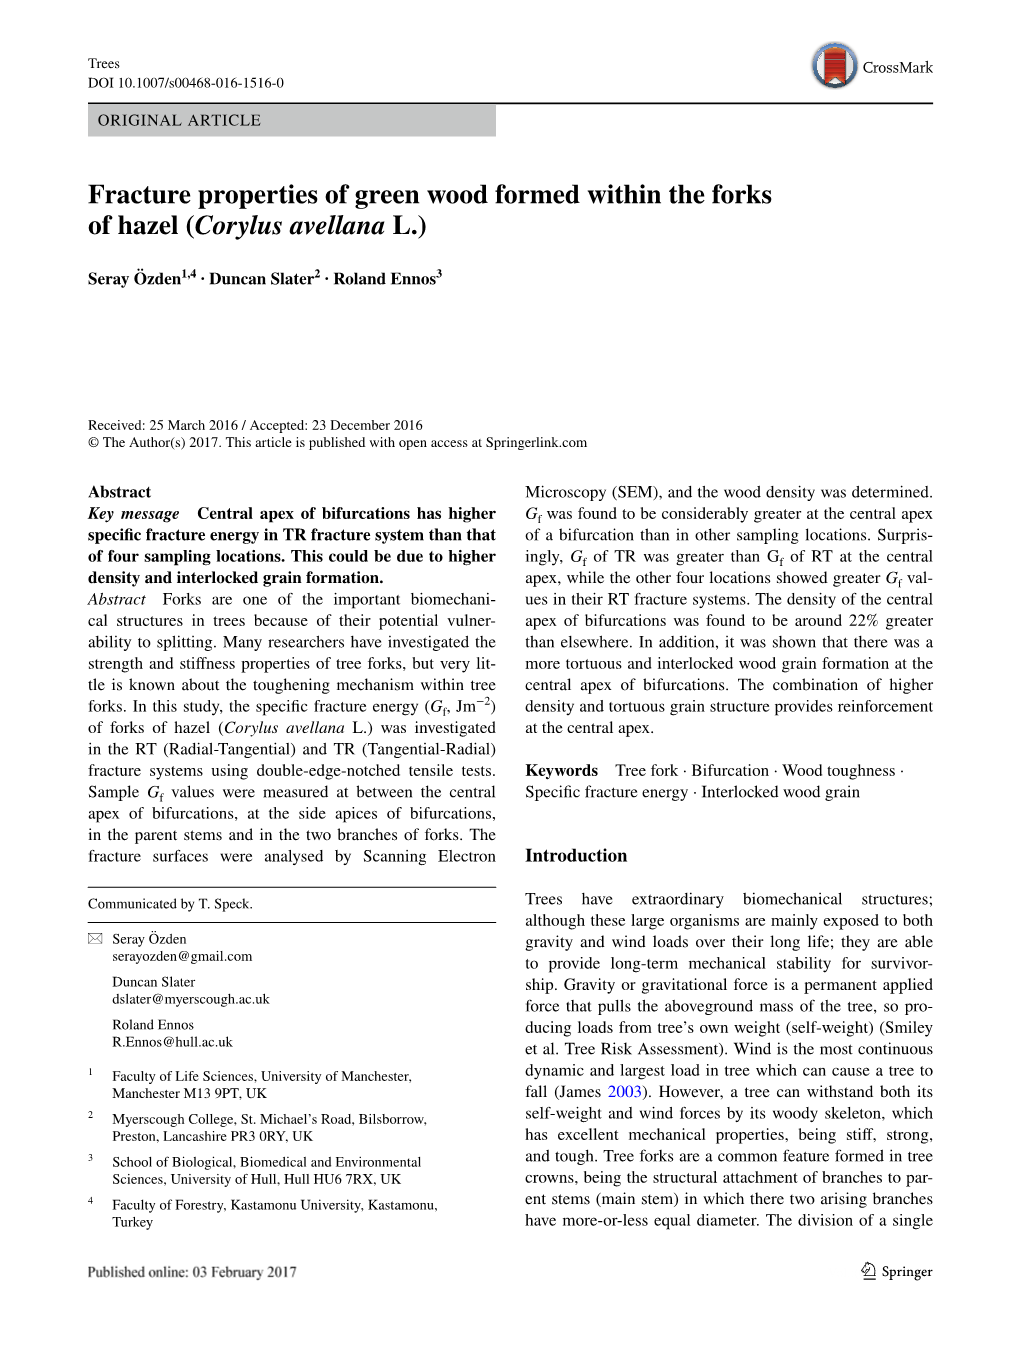 Fracture Properties of Green Wood Formed Within the Forks of Hazel (Corylus Avellana L.)